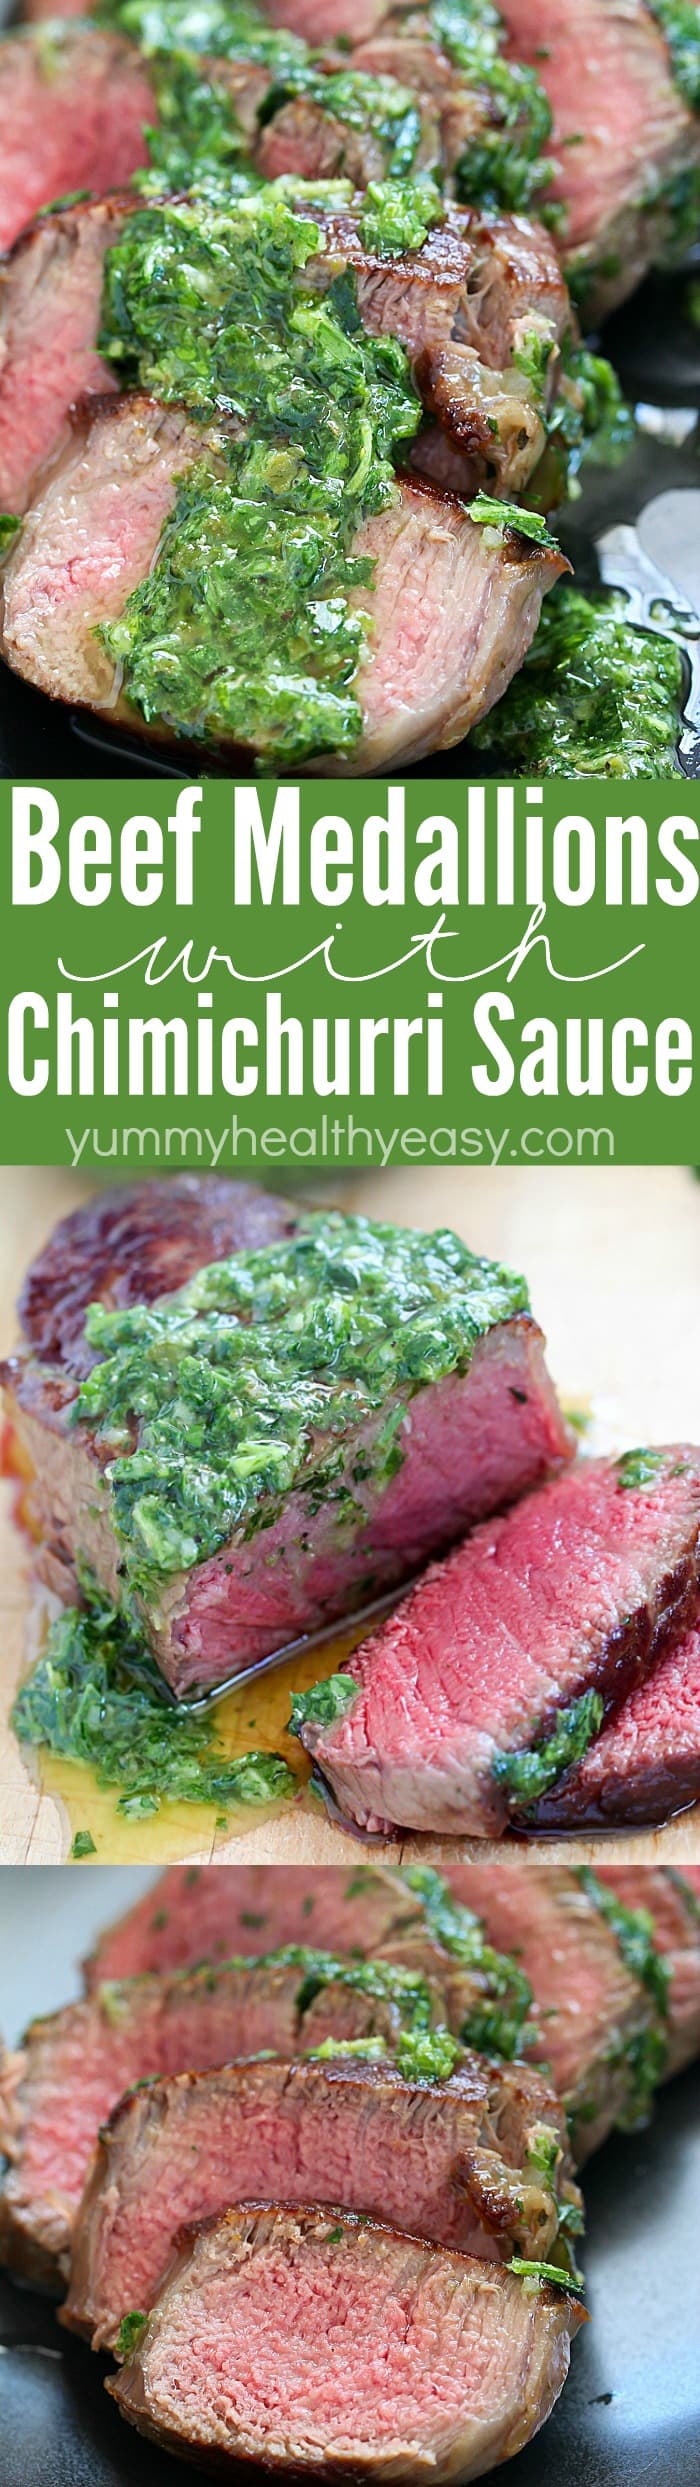 Let me show you how to make the most tender Beef Medallions, with the perfect crust and served with a flavorful and simple Argentinian Chimichurri Sauce! A quick and easy dinner recipe made in under 30 minutes (but looks fancy)! AD via @jennikolaus